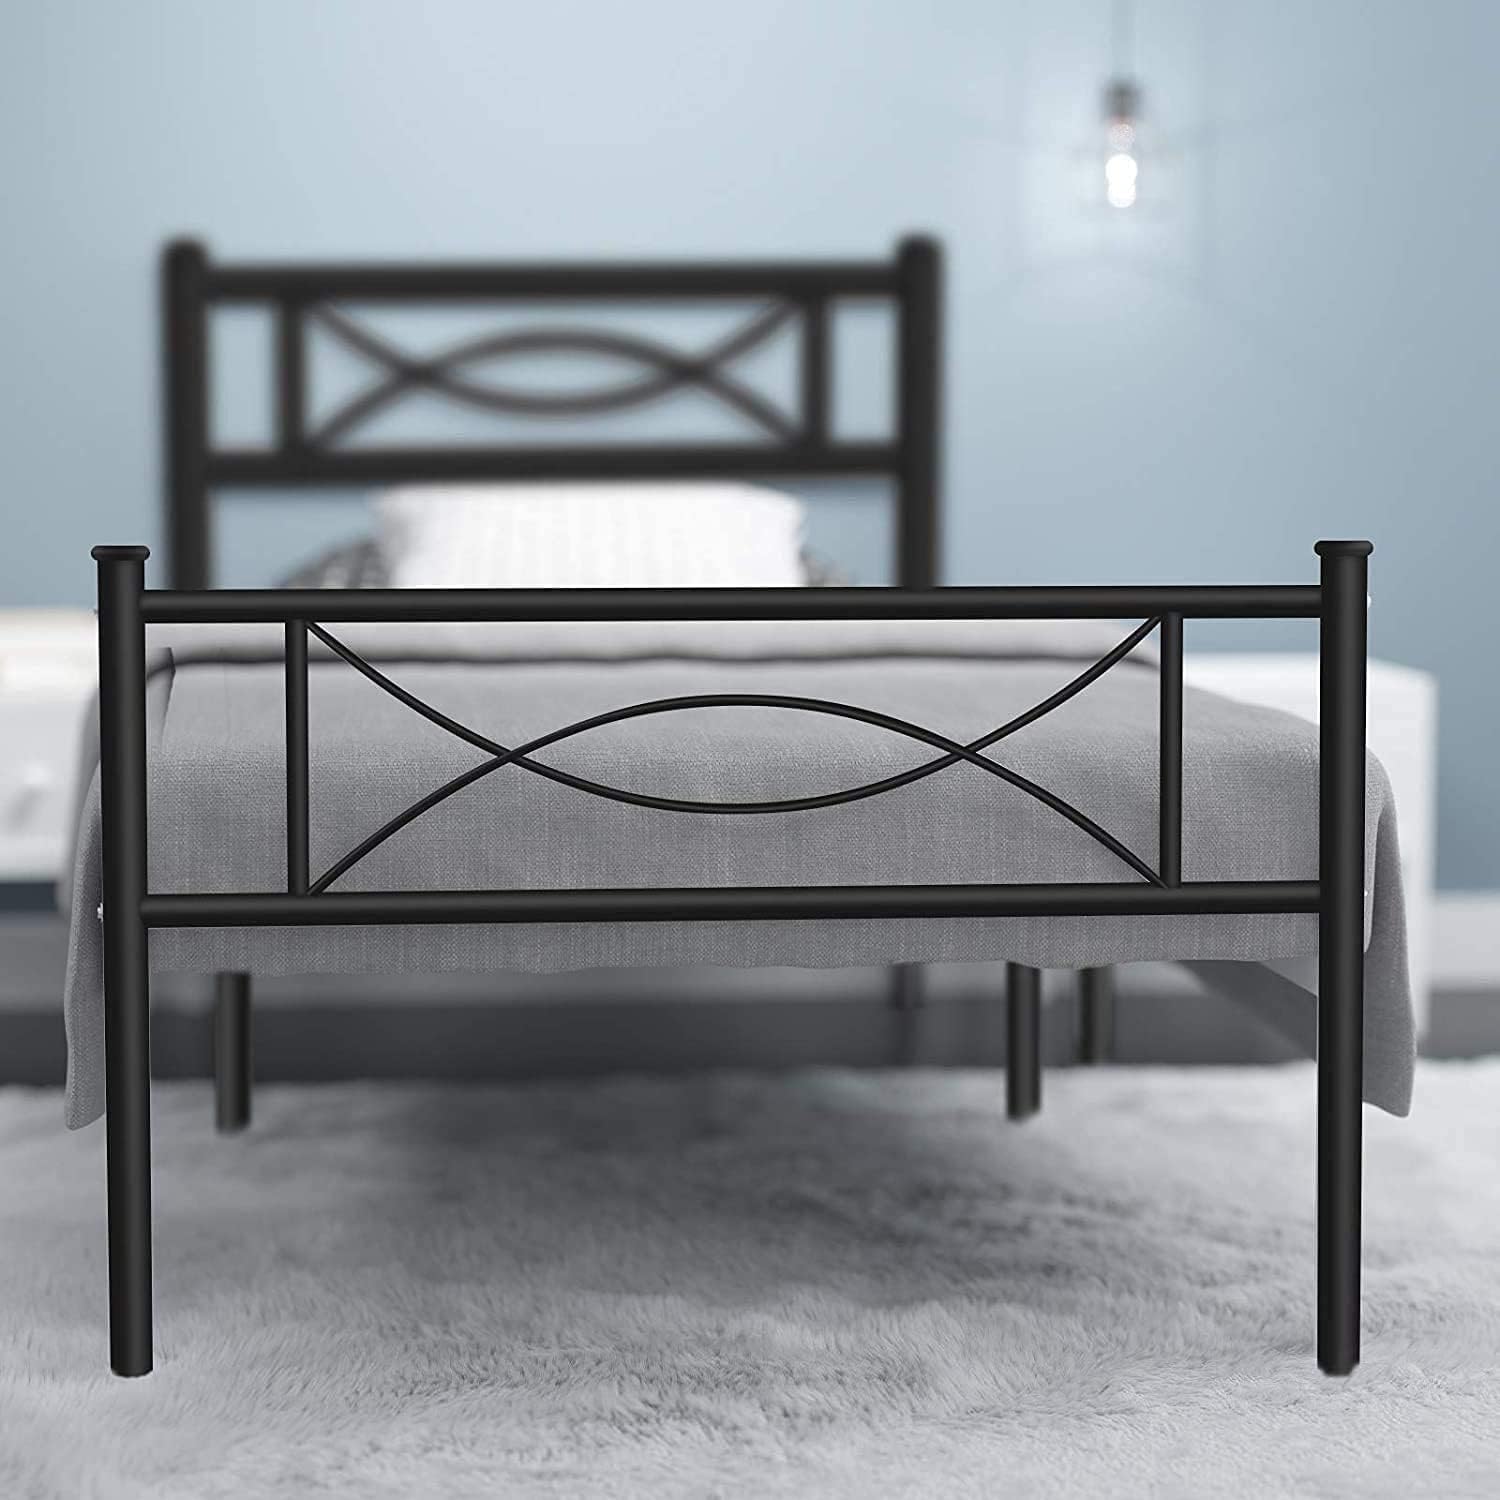 Platform Steel Bed Frame Twin Size Bed Mattress Foundation Support with Headboard and Footboard No Box Spring Need Metal Platform